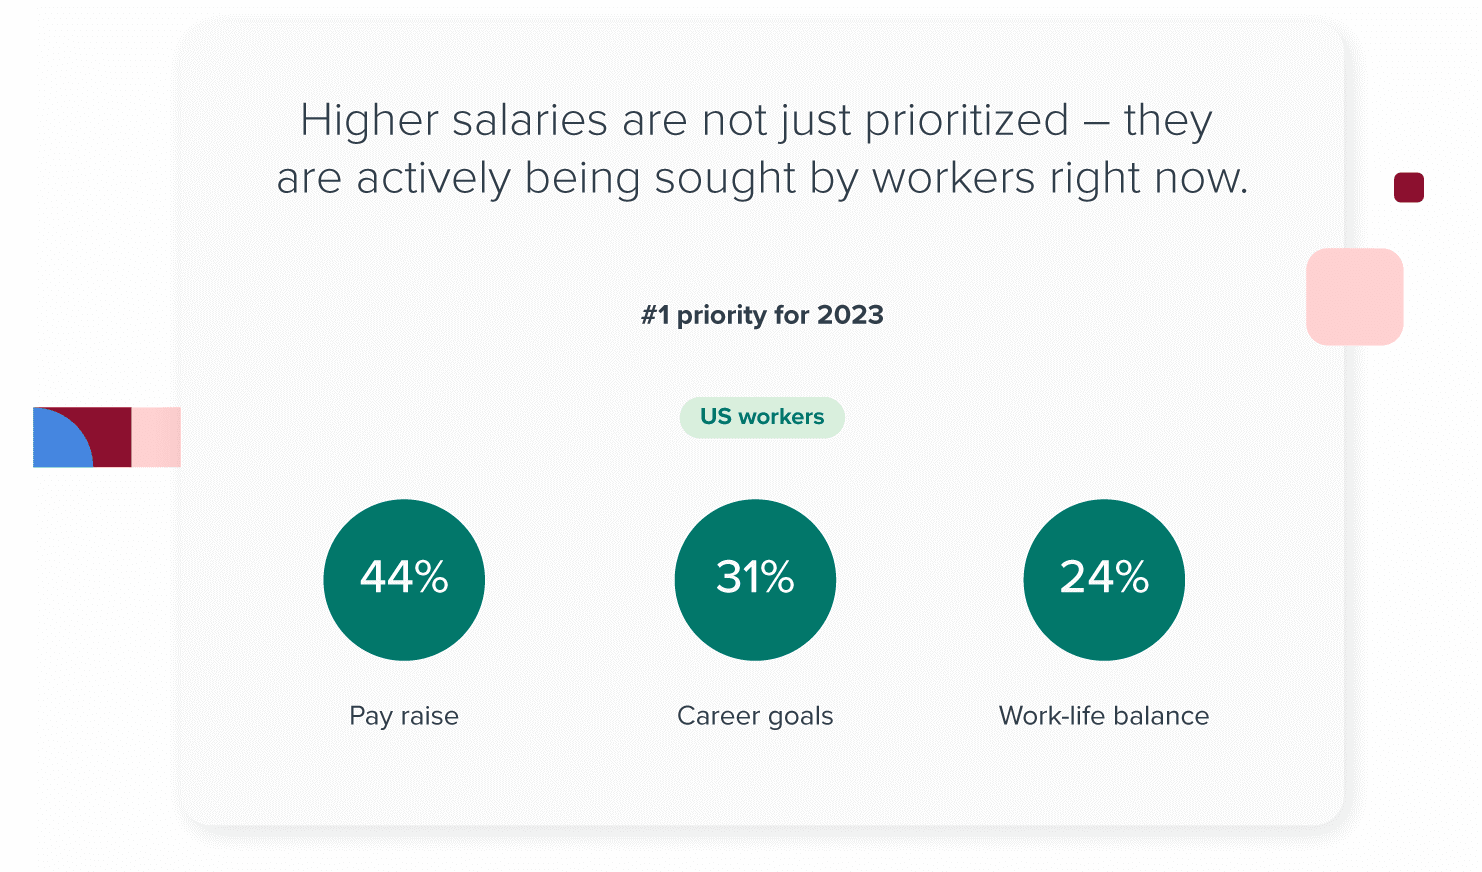 44% of US-based workers say a pay raise is the #1 priority for 2023, ahead of career goals (31%) and work-life balance (24%) 